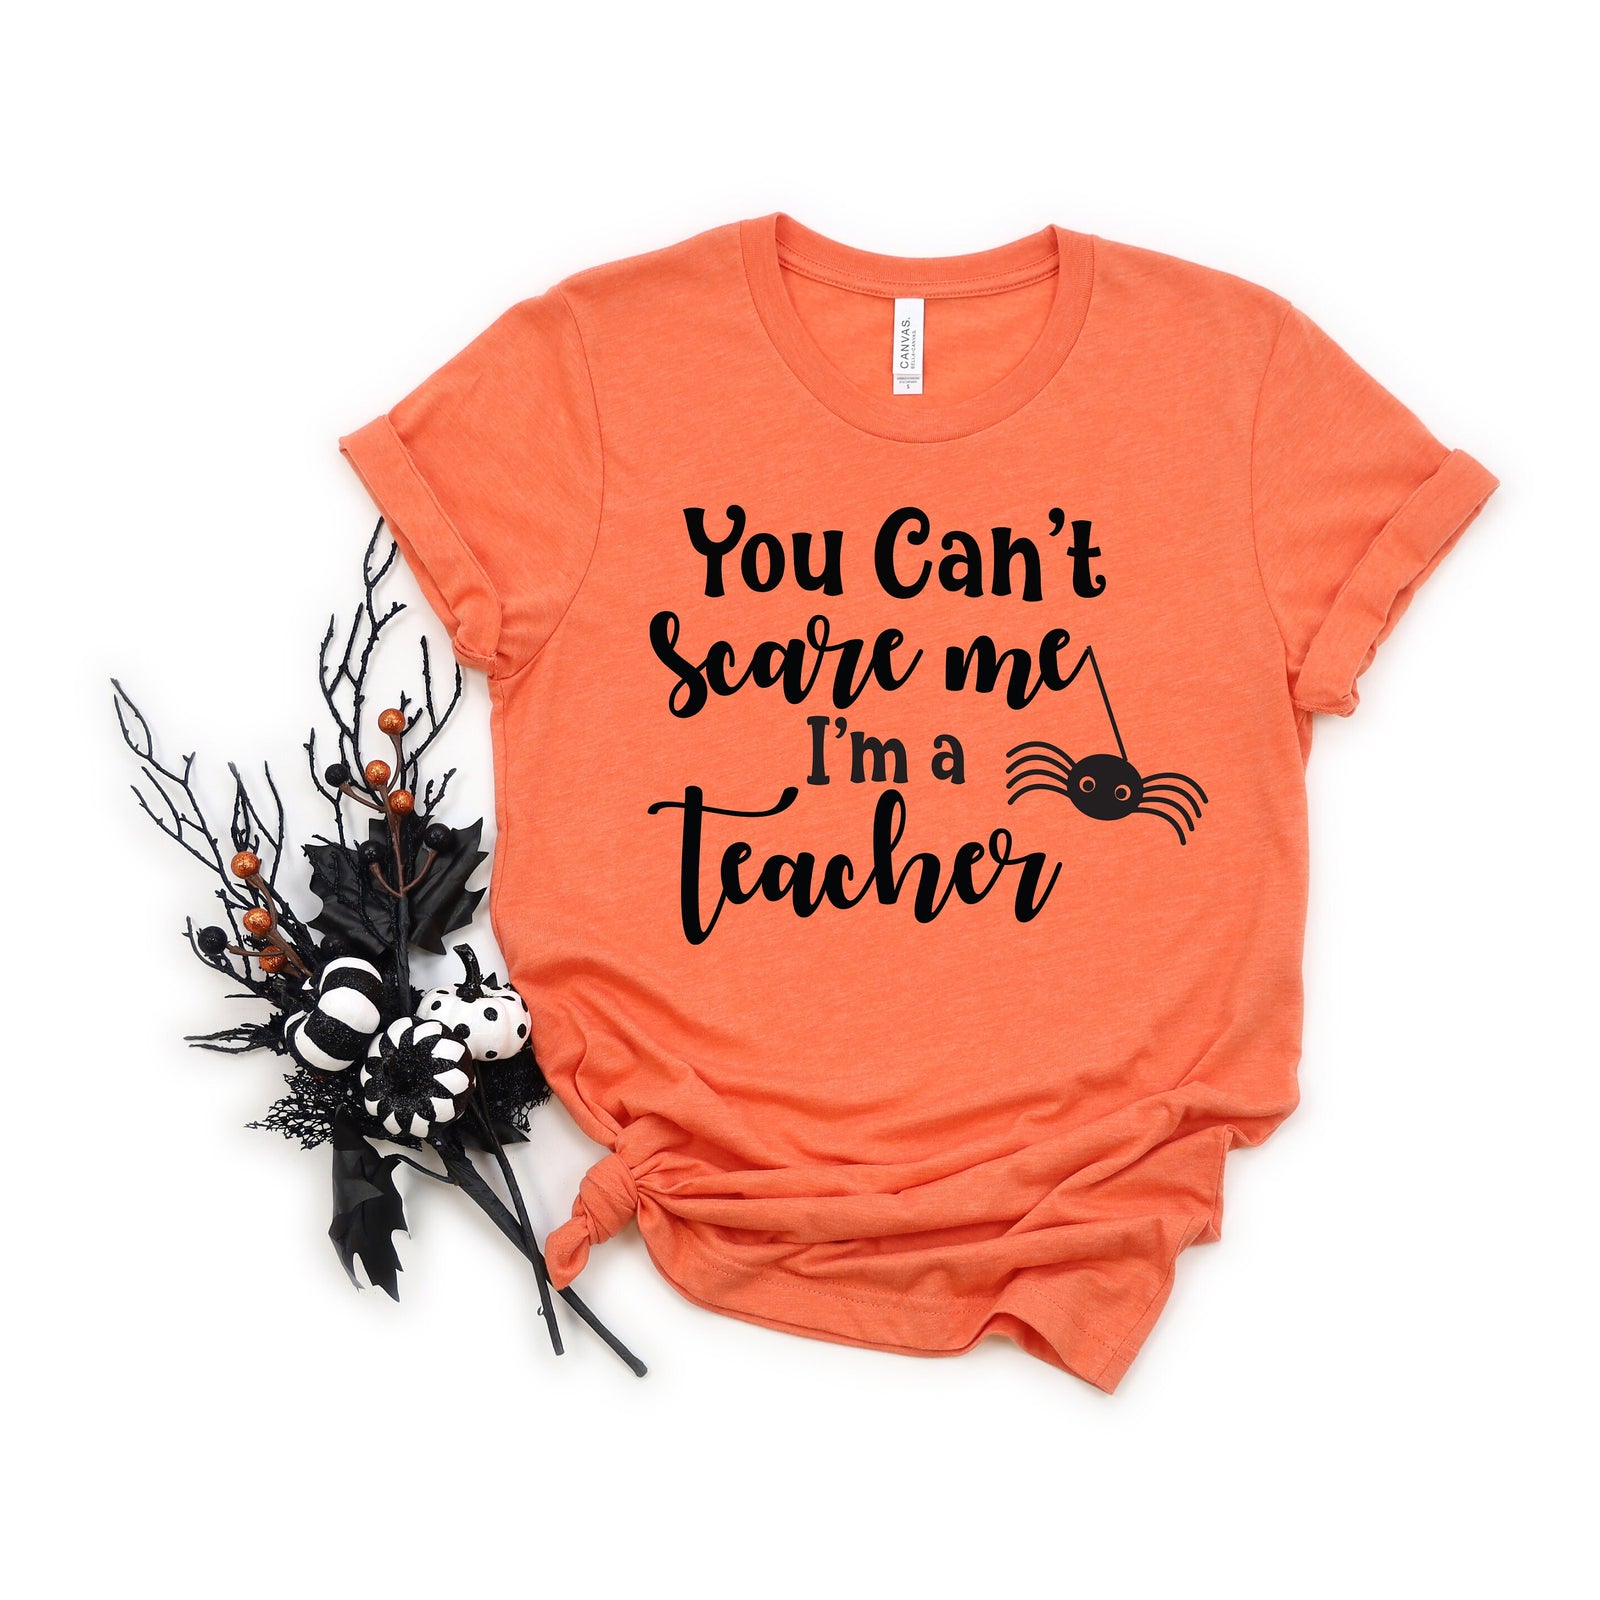 You Can't Scare Me Adult T Shirt - Halloween - Office - School - Teacher - Grade Level - Fun Not So Scary Spider